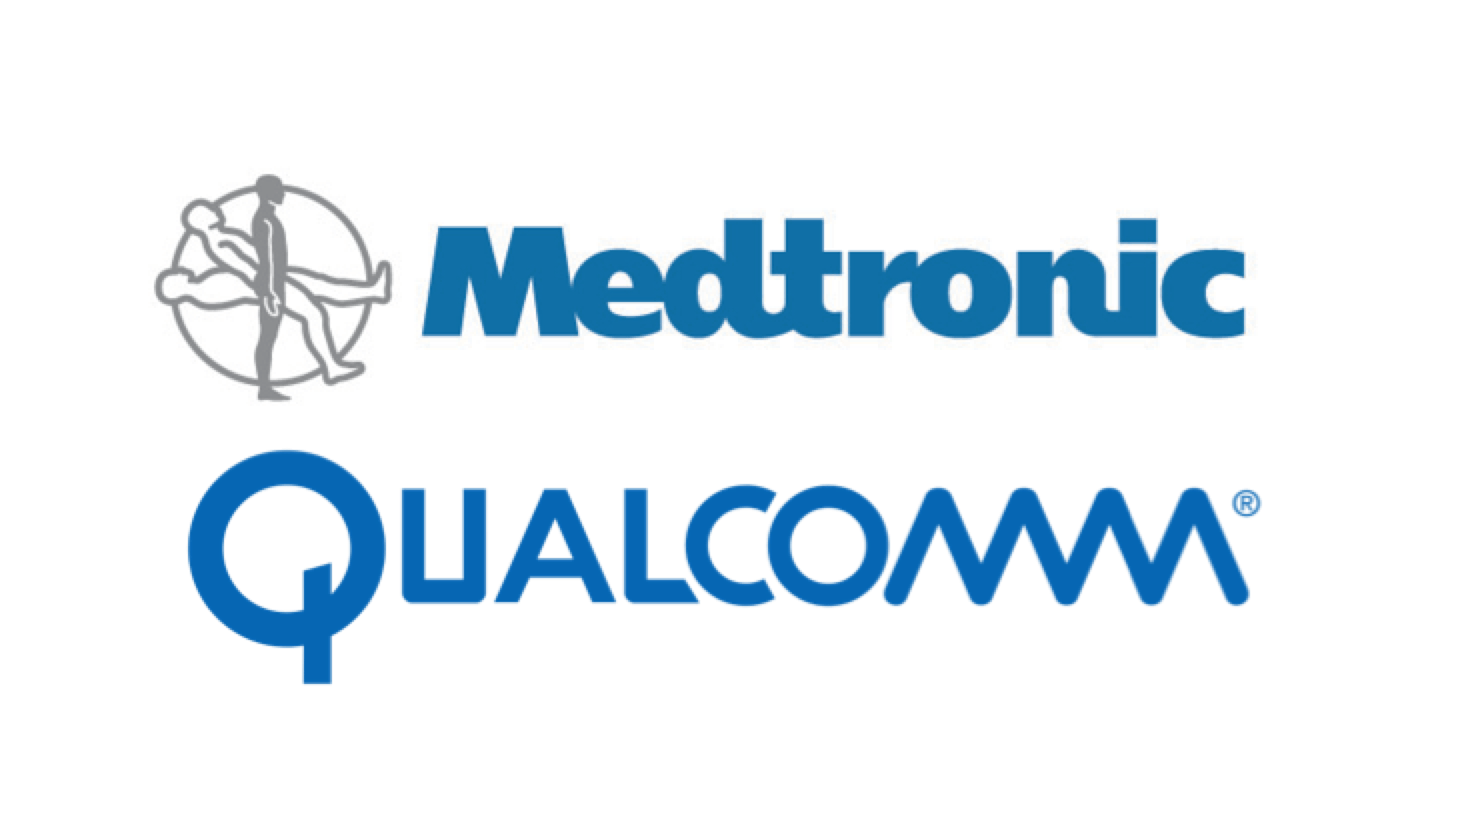 Qualcomm Logo - Medtronic and Qualcomm Partner To Develop Fully Disposable